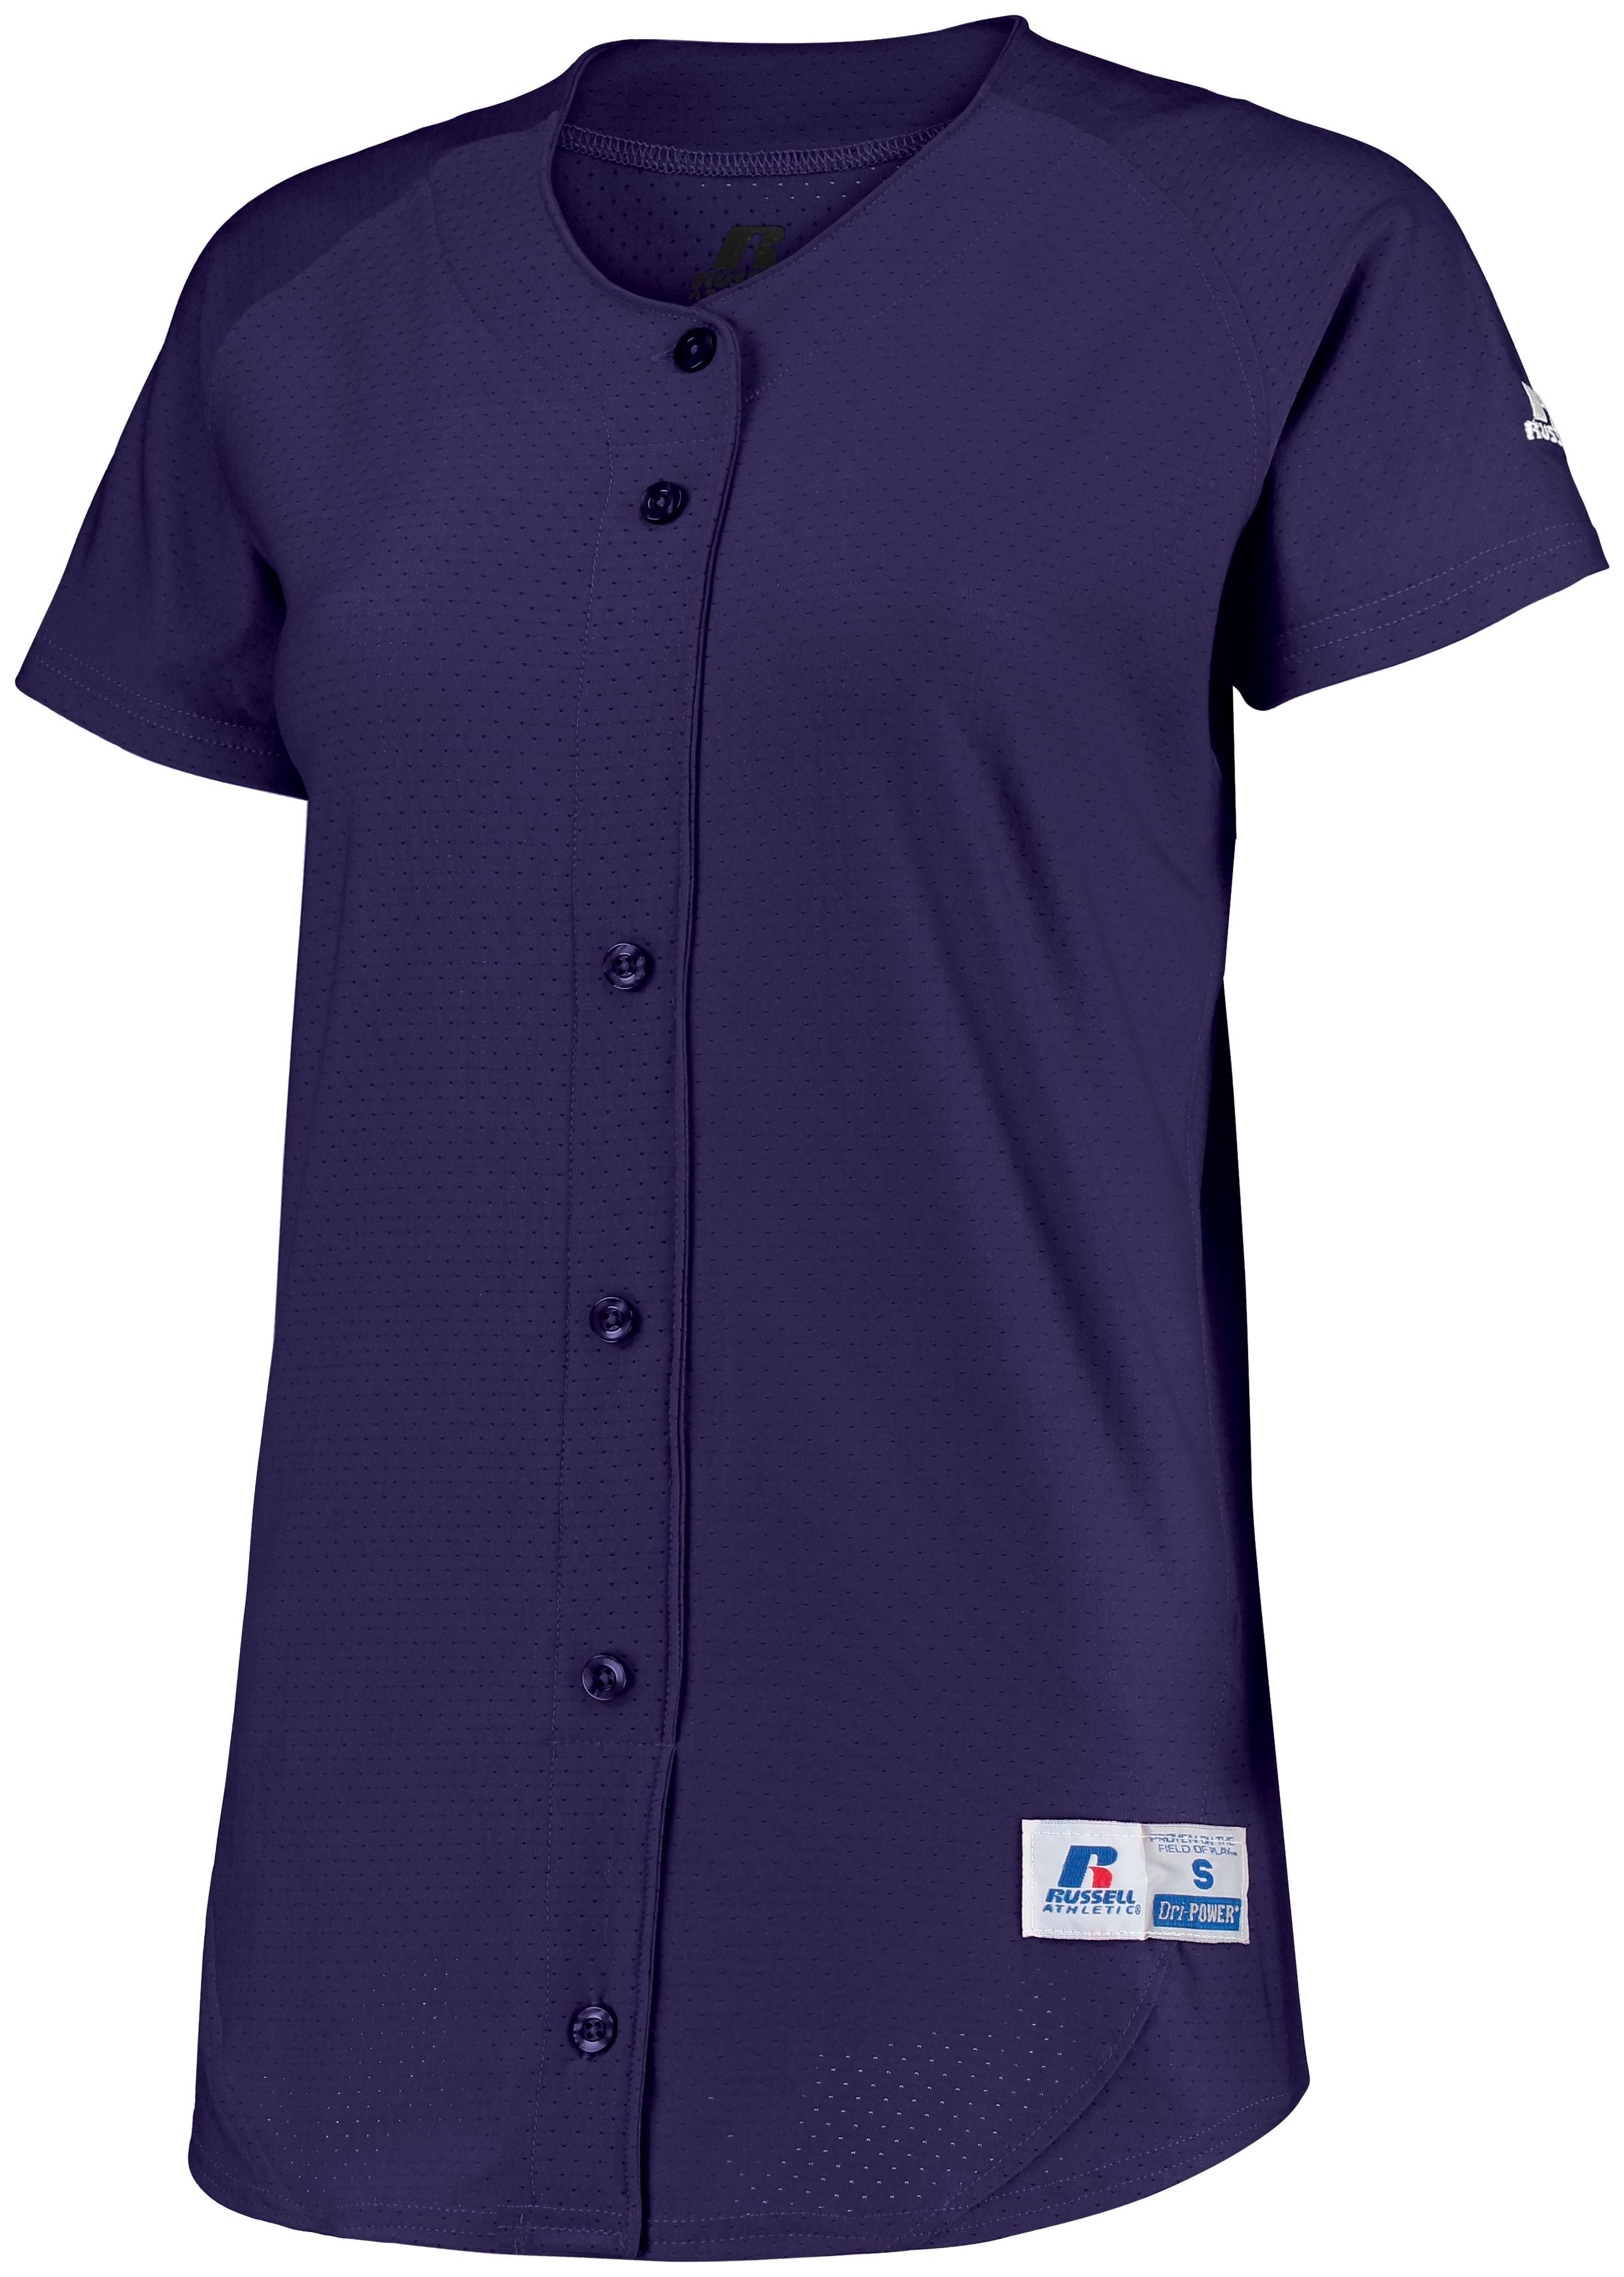 Russell Athletic Ladies Stretch Faux Button Jersey in Purple  -Part of the Ladies, Ladies-Jersey, Softball, Russell-Athletic-Products, Shirts product lines at KanaleyCreations.com